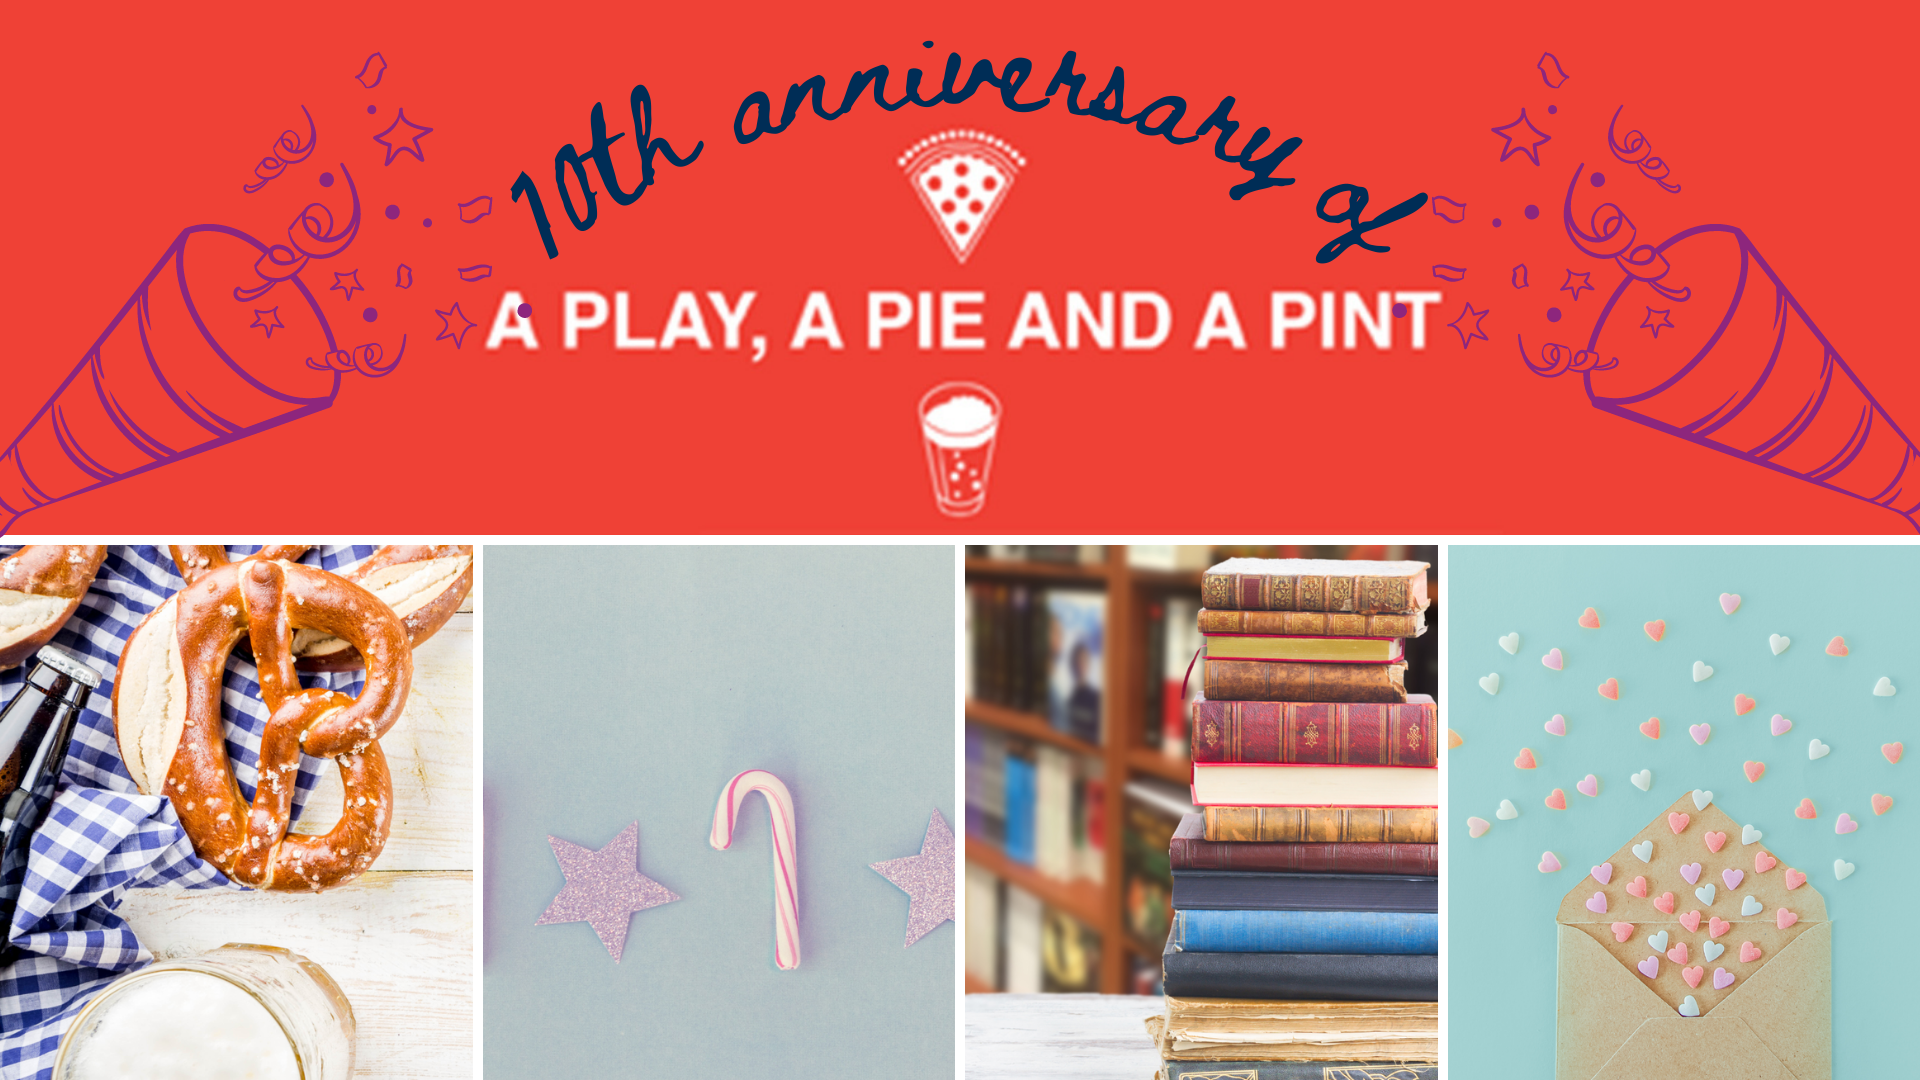 The text "10th anniversary of A Play, A Pie, and a Pint" with illustrations of confetti, over the images for each of the shows